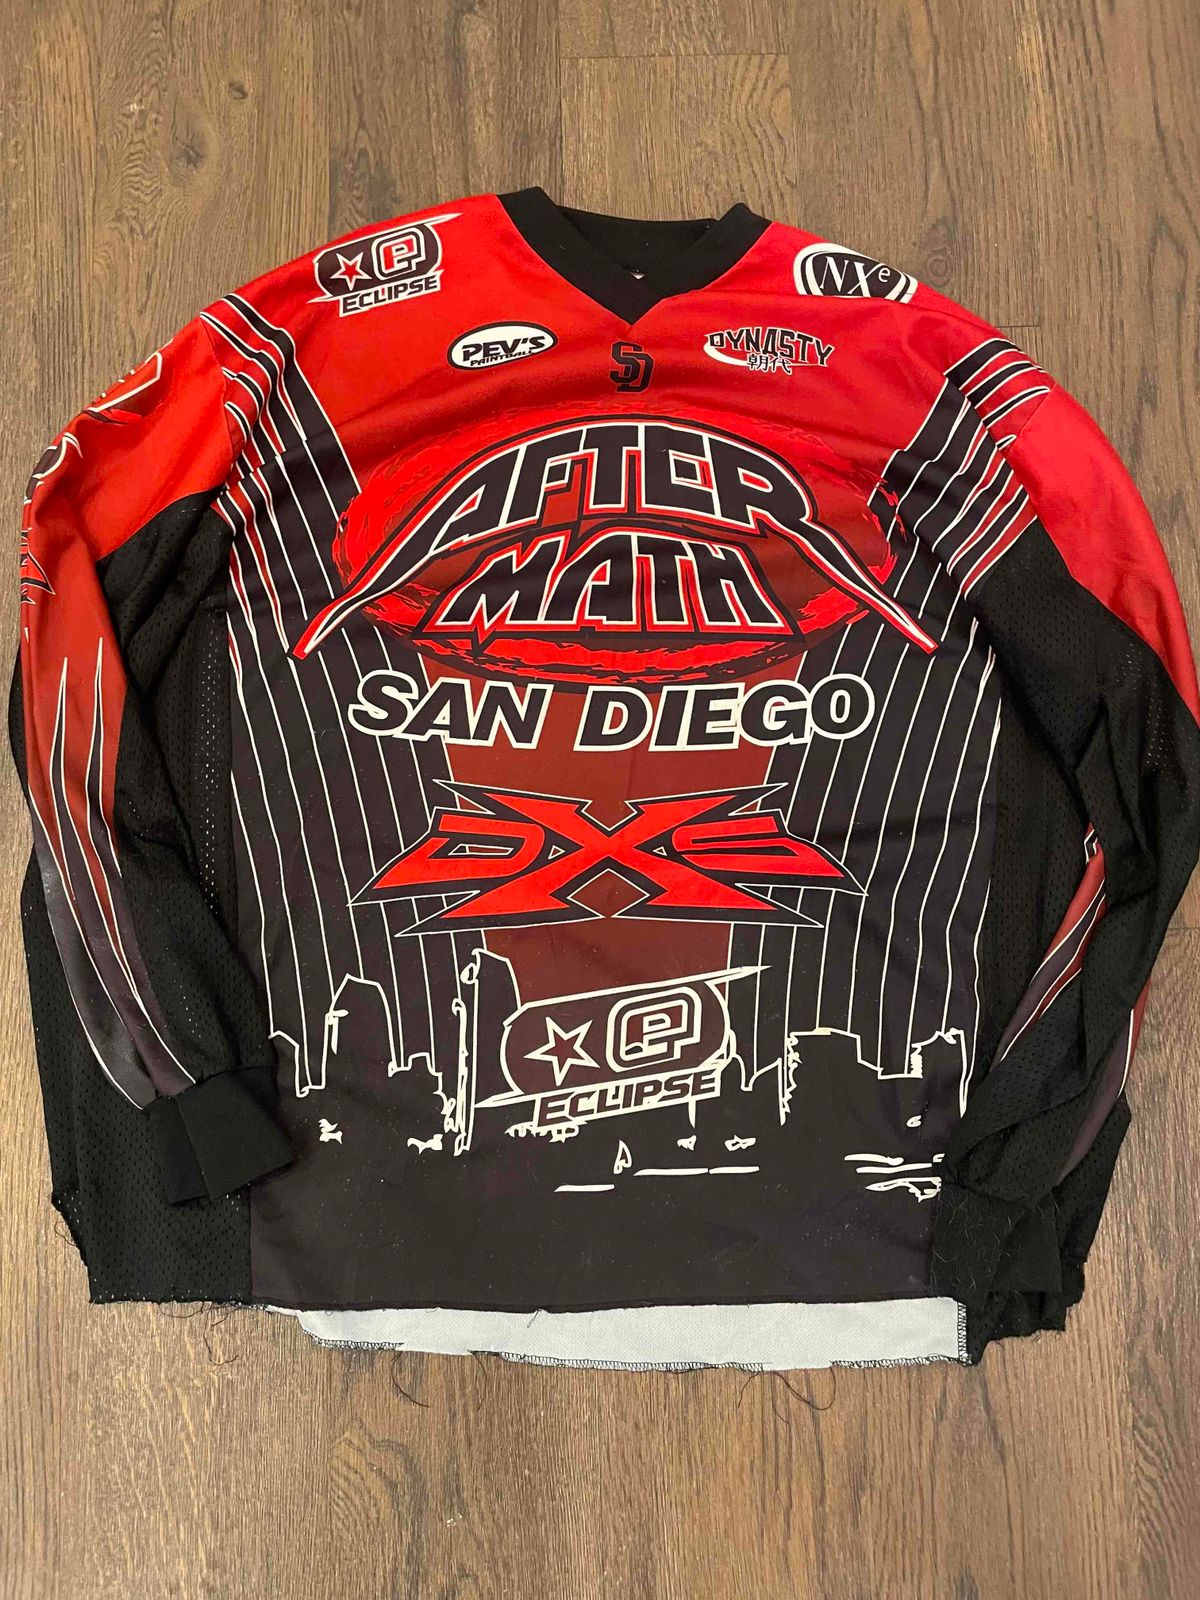 2007 SD Aftermath Jersey